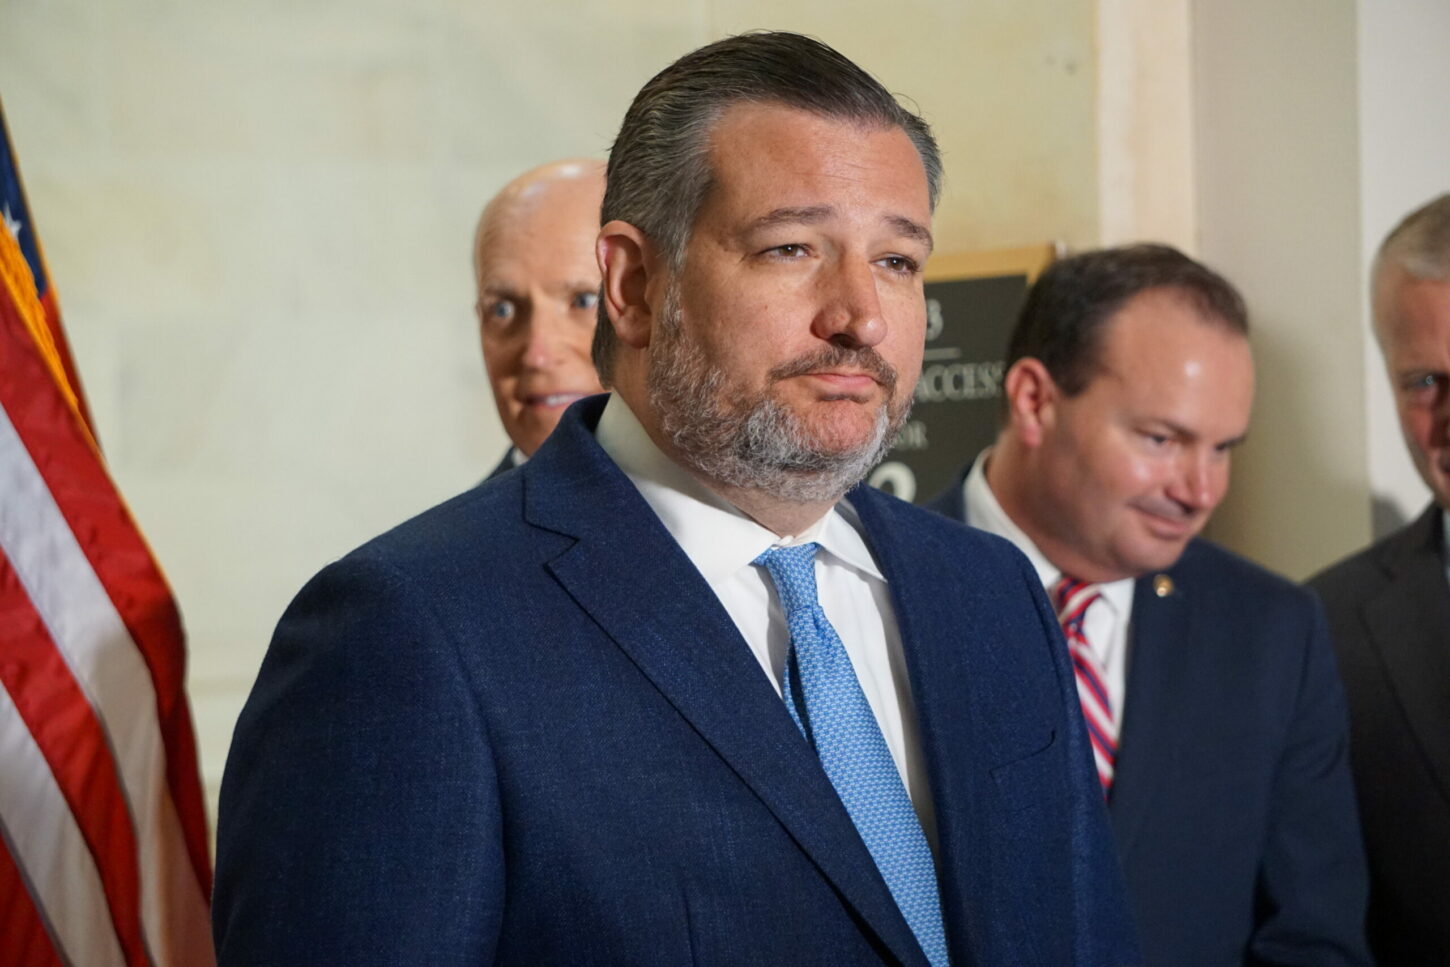 Cruz: Biden is ‘Undermining Israel’ and Should Stand up Against the ‘Crazy Left’